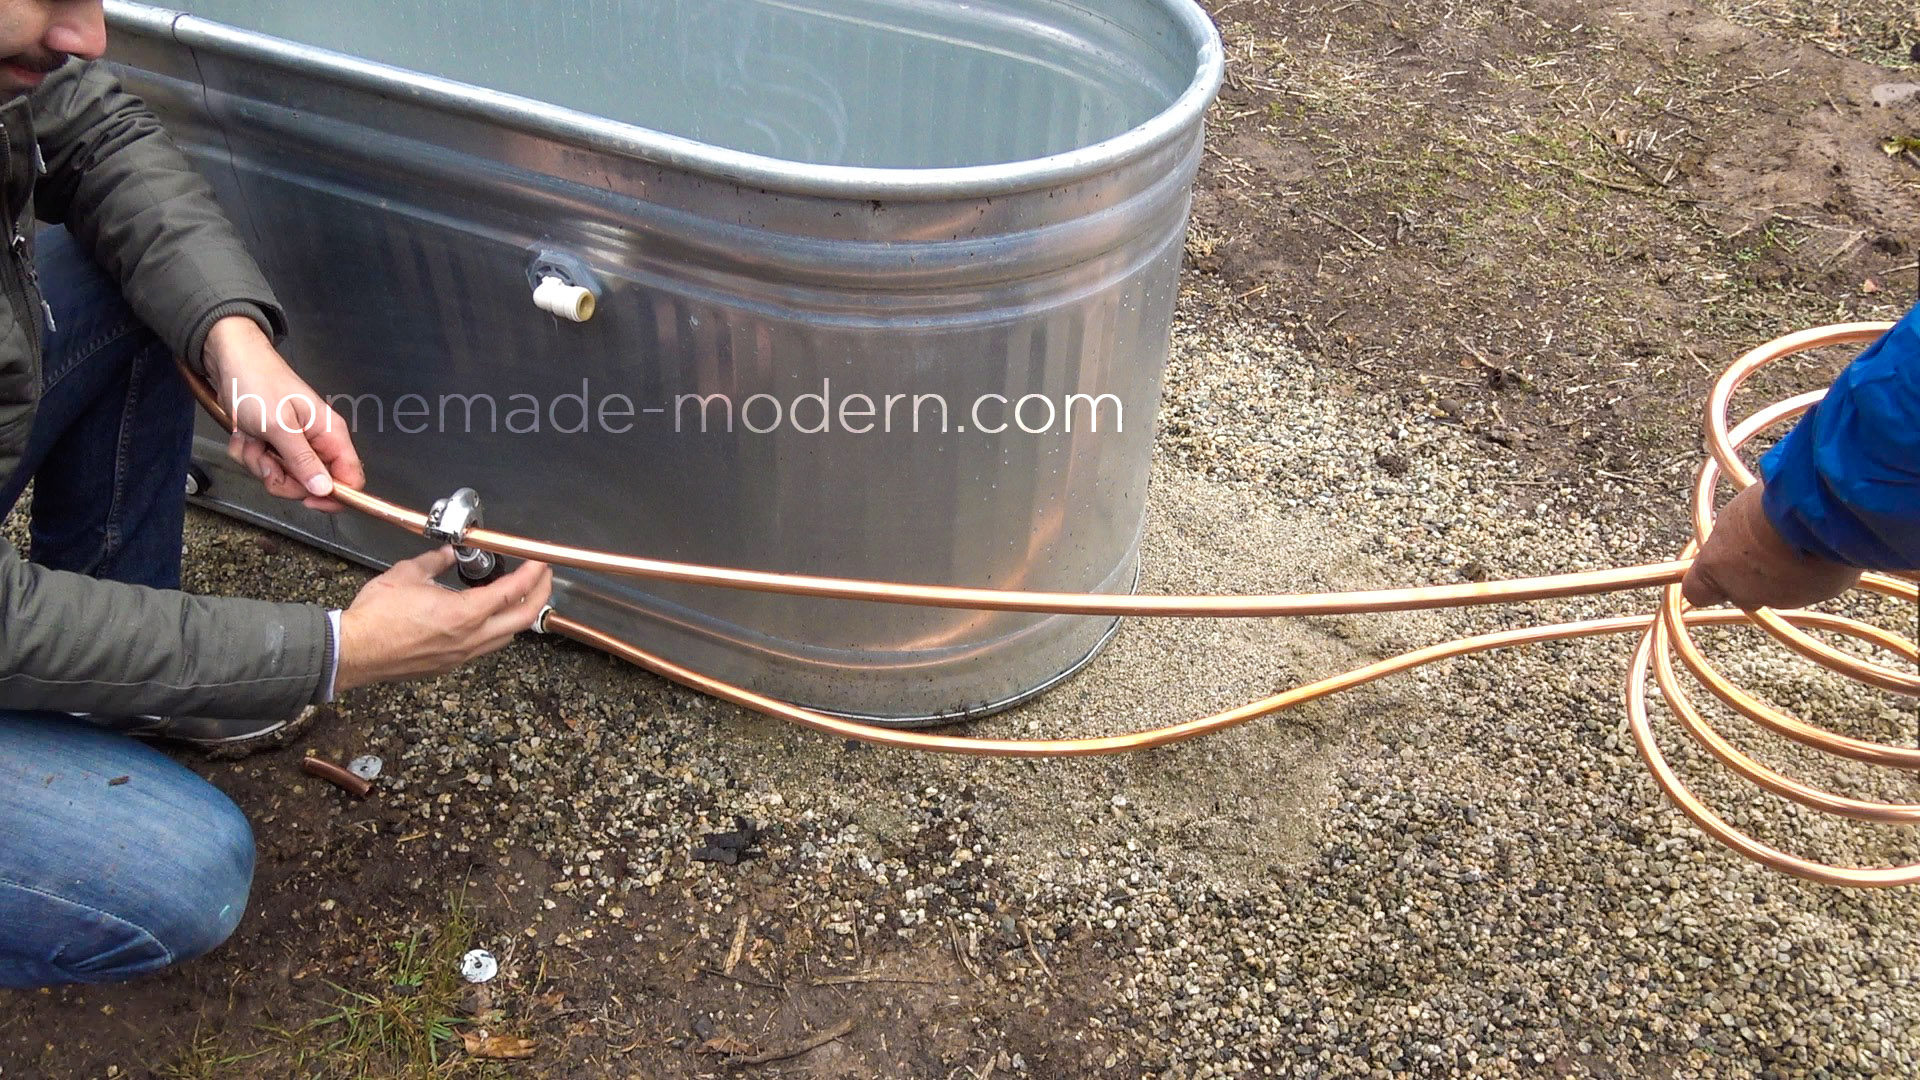 This DIY wood fired Hot Tub is made from a stock tank and copper tubing and cost less than $250. Full instructions can be found at HomeMade-Modern.com